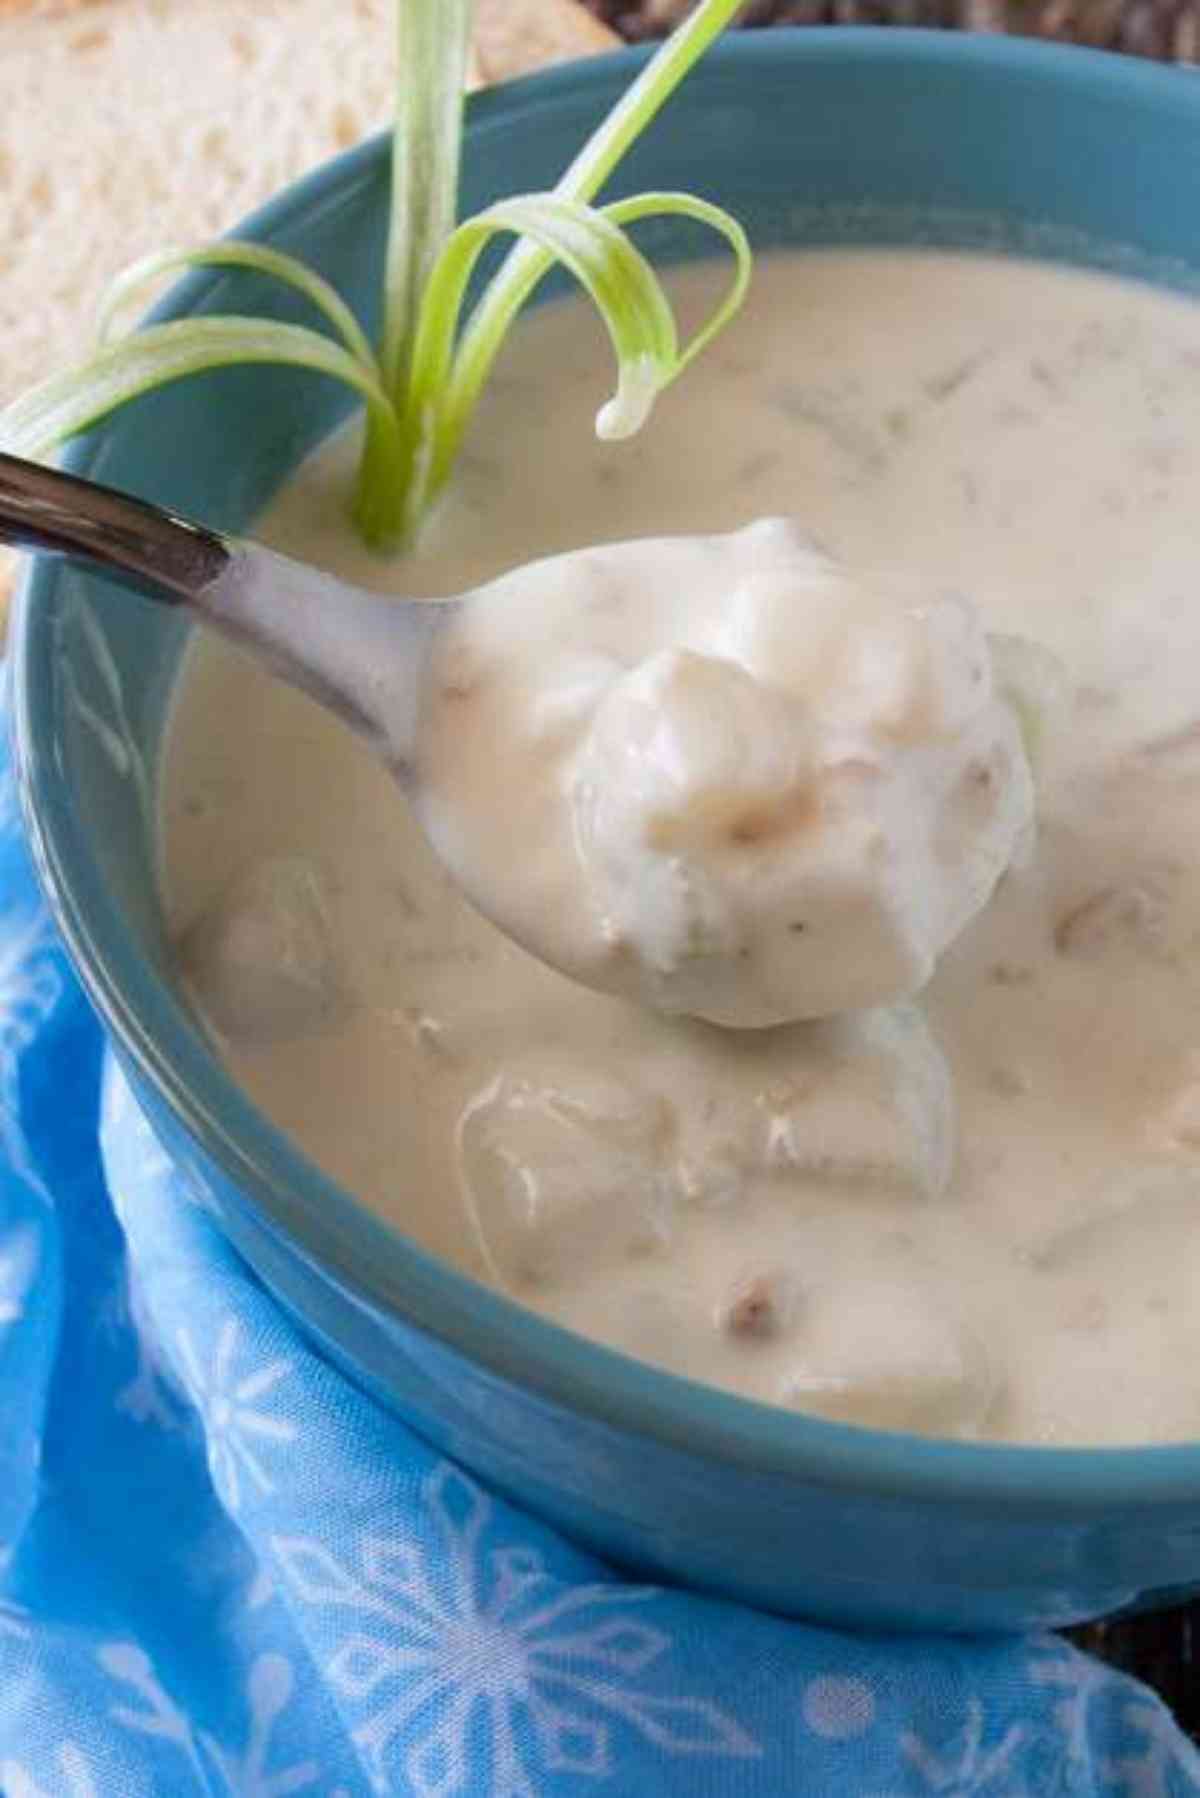 A spoonful of clam chowder.